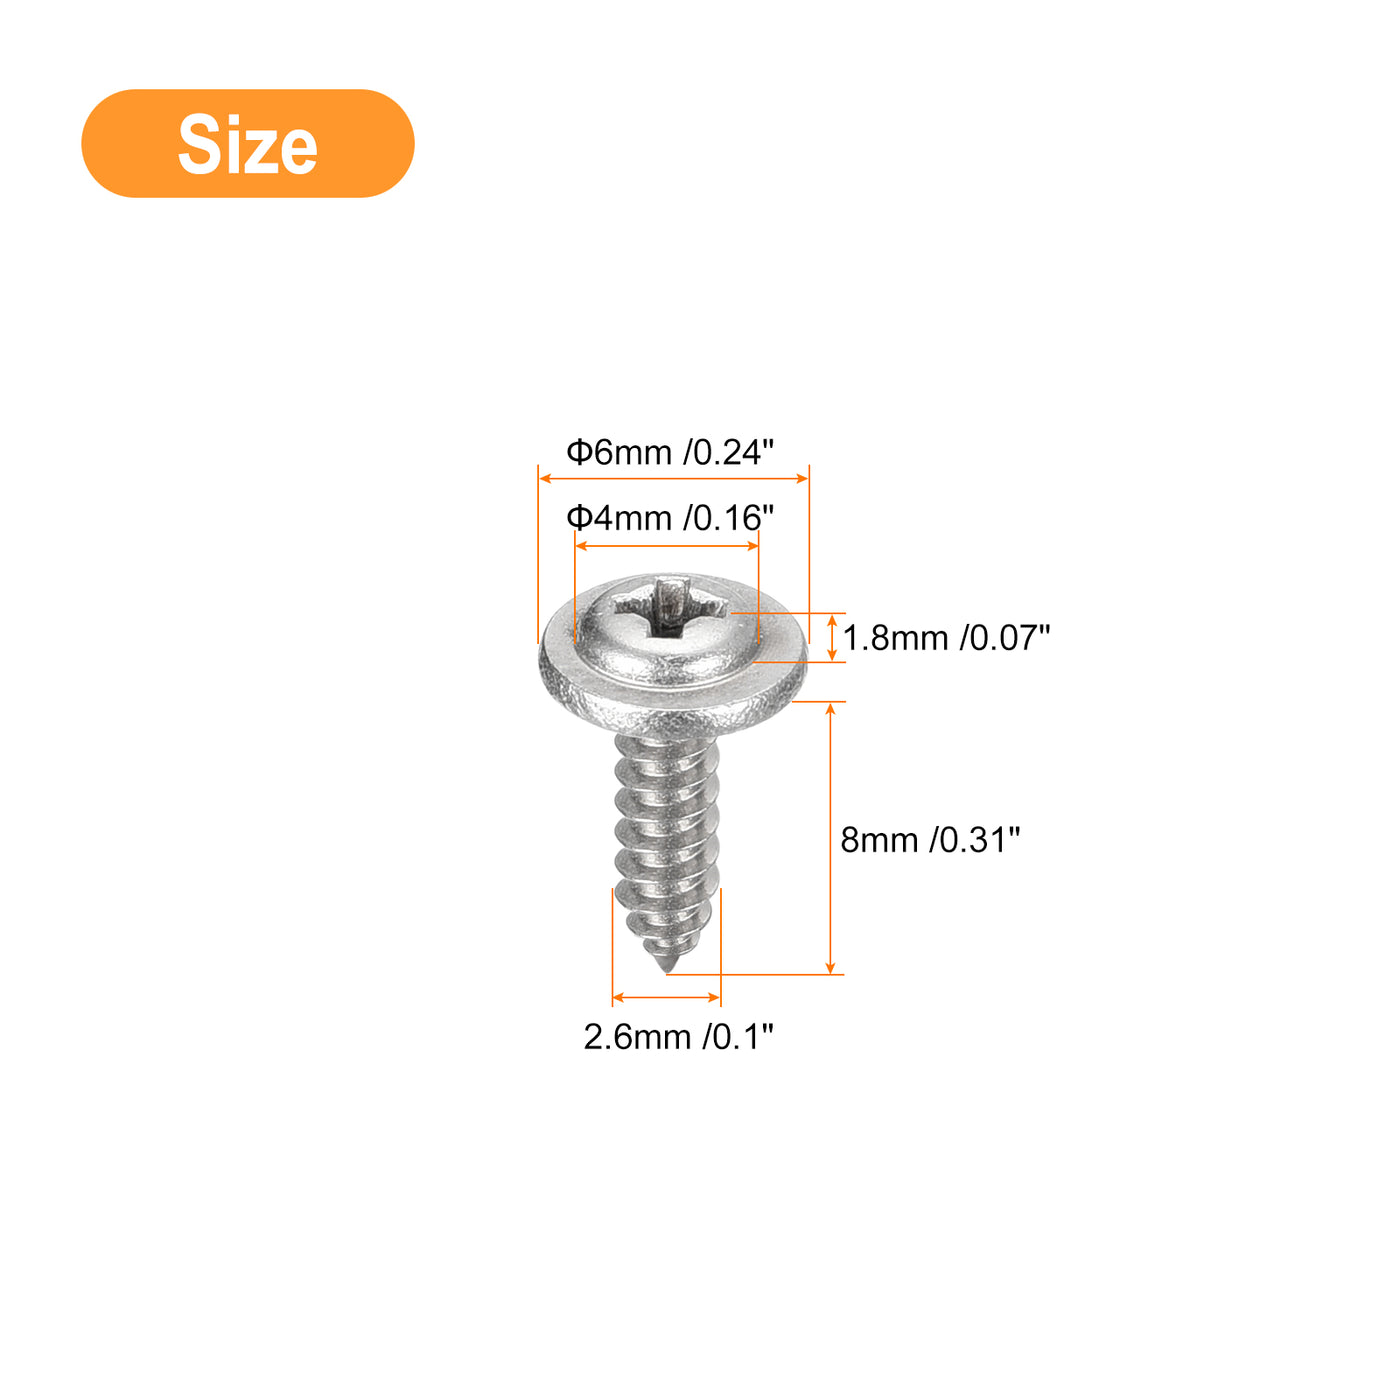 uxcell Uxcell ST2.6x8mm Phillips Pan Head Self-tapping Screw with Washer, 100pcs - 304 Stainless Steel Wood Screw Full Thread (Silver)